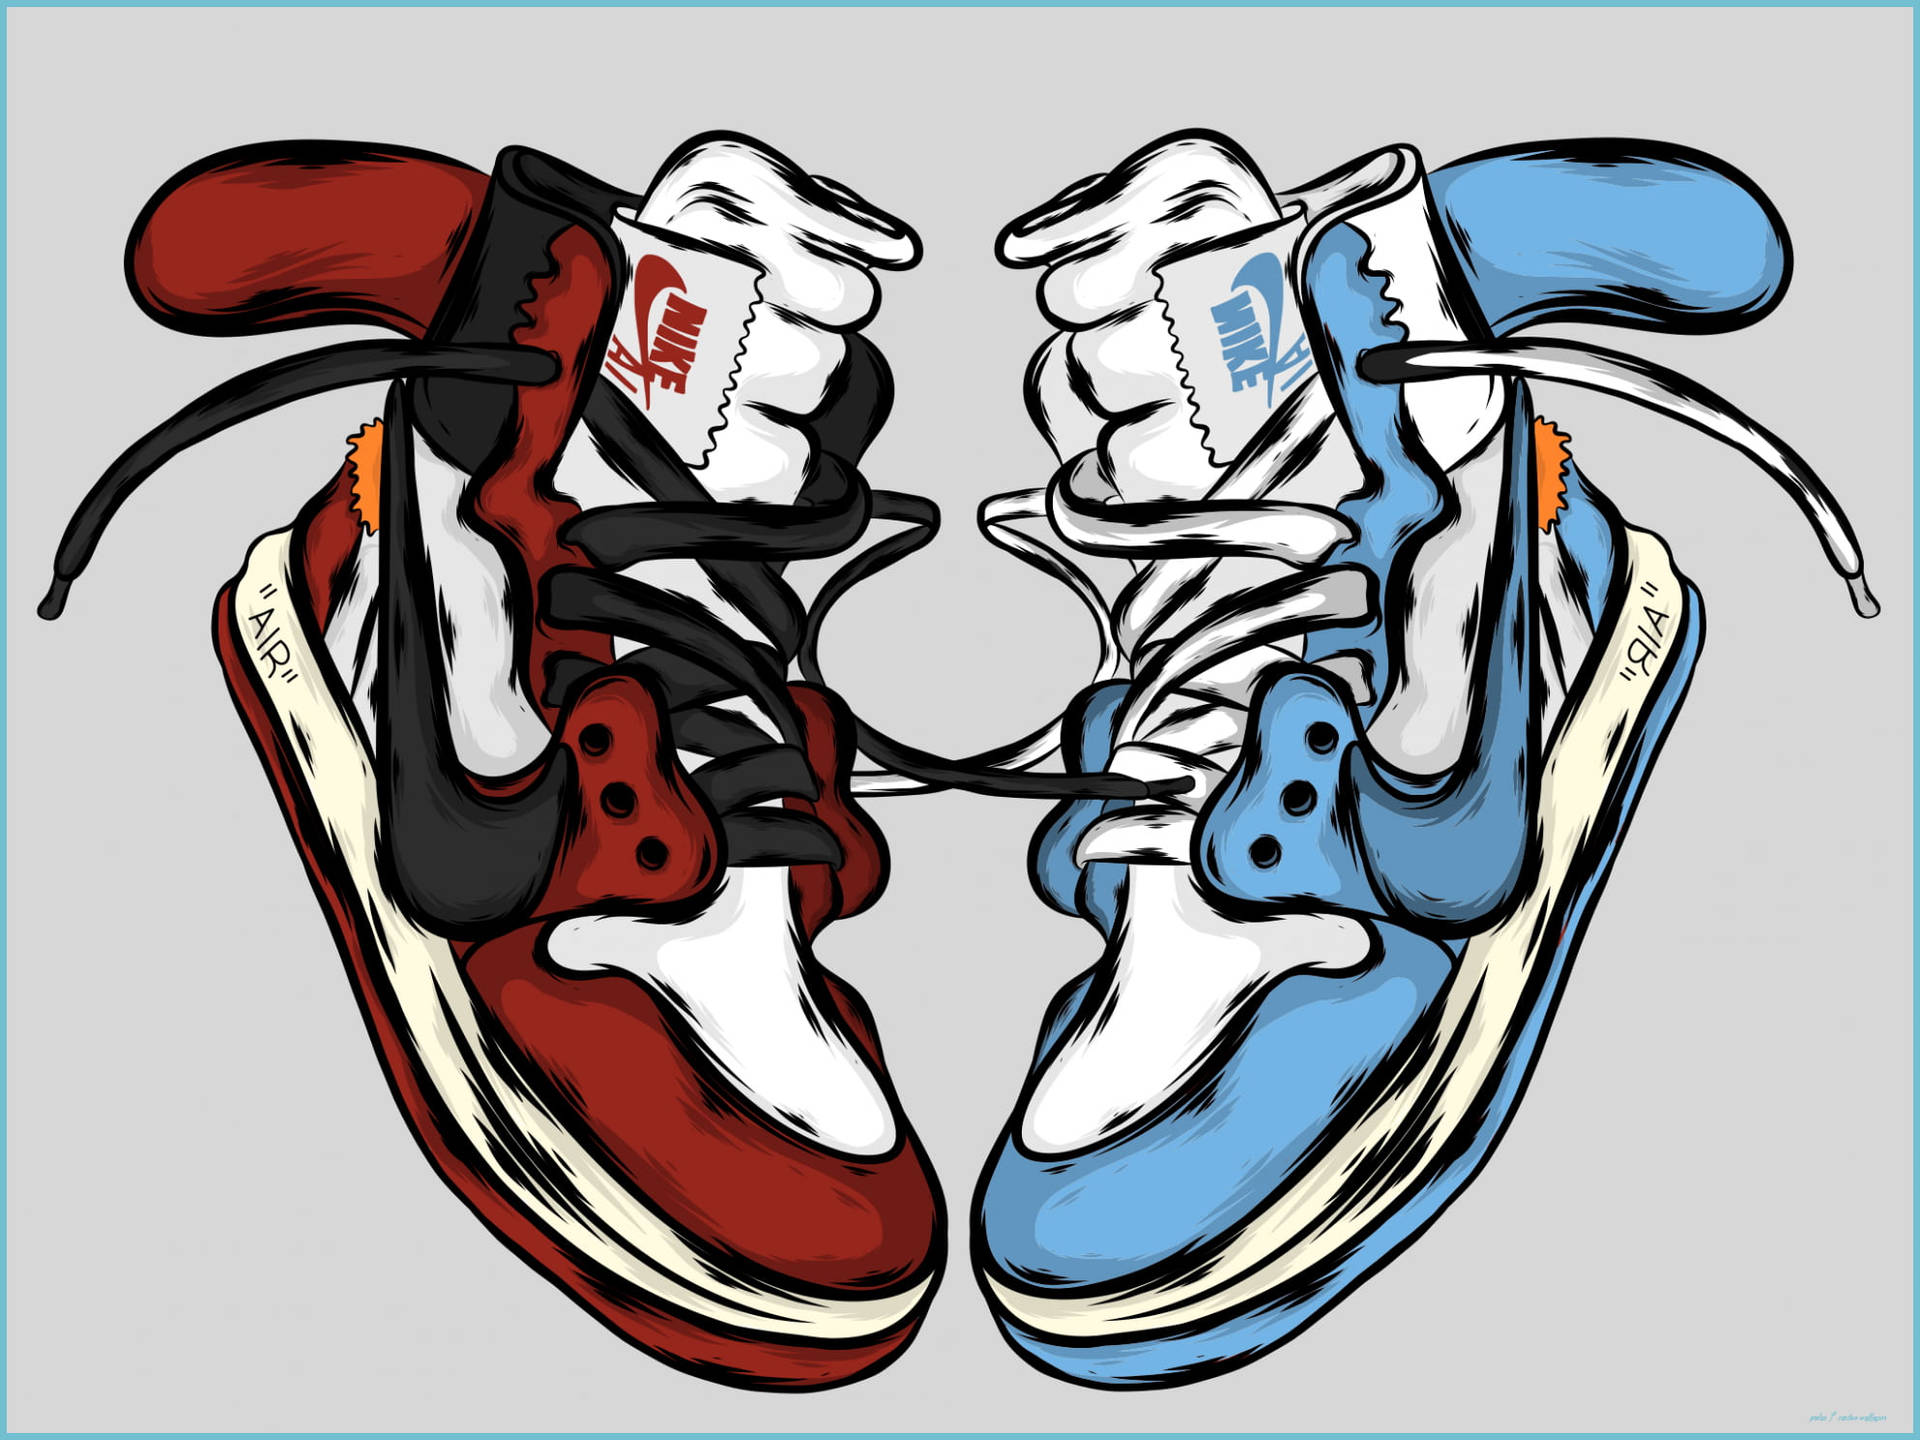 Download Sky Blue And Red Nike Cartoon Shoes Wallpaper | Wallpapers.com